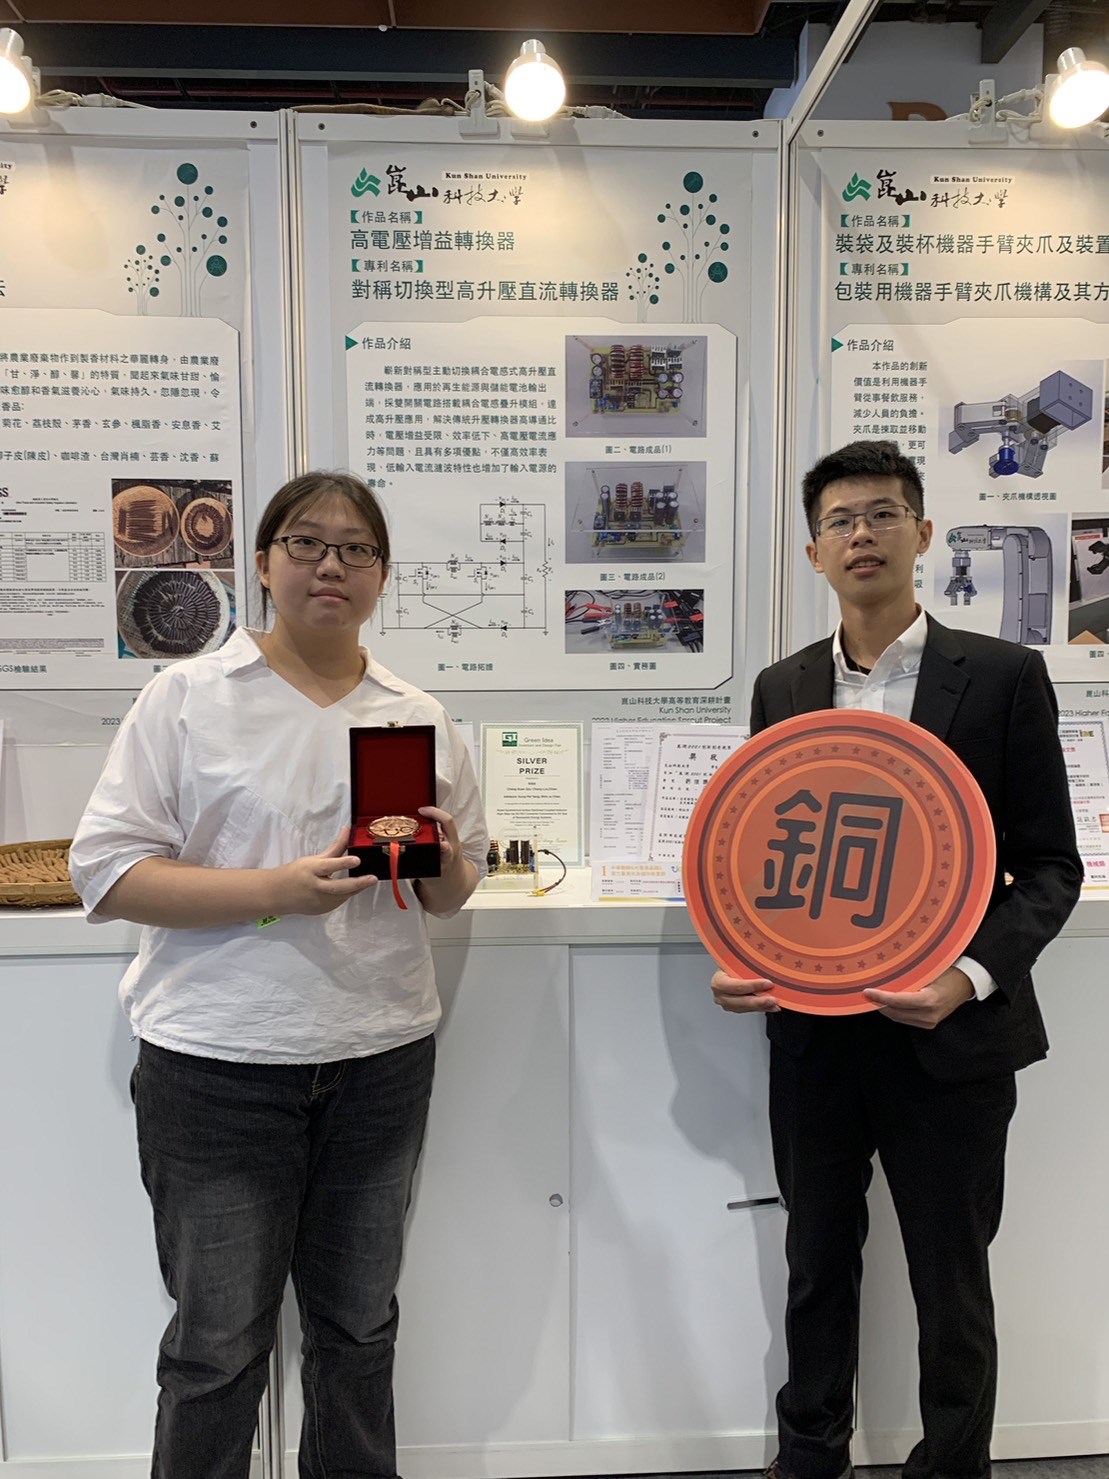 09.KSU Tops the Nation in Medal Count Among Universities at Taiwan Innovation Expo